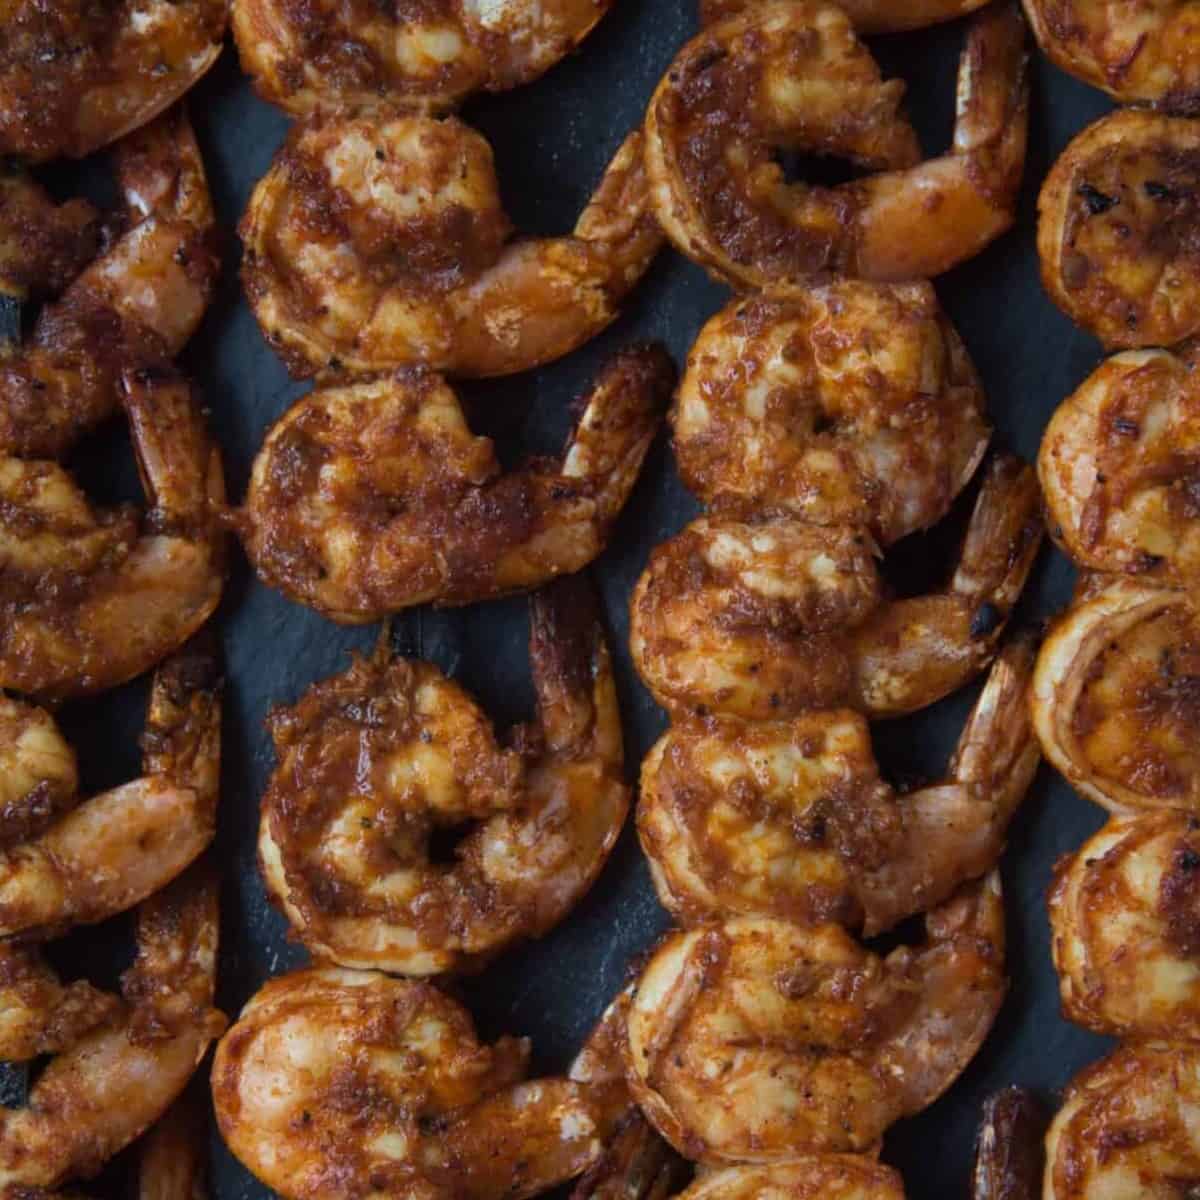 Old Bay Marinated and Grilled Shrimp Recipe